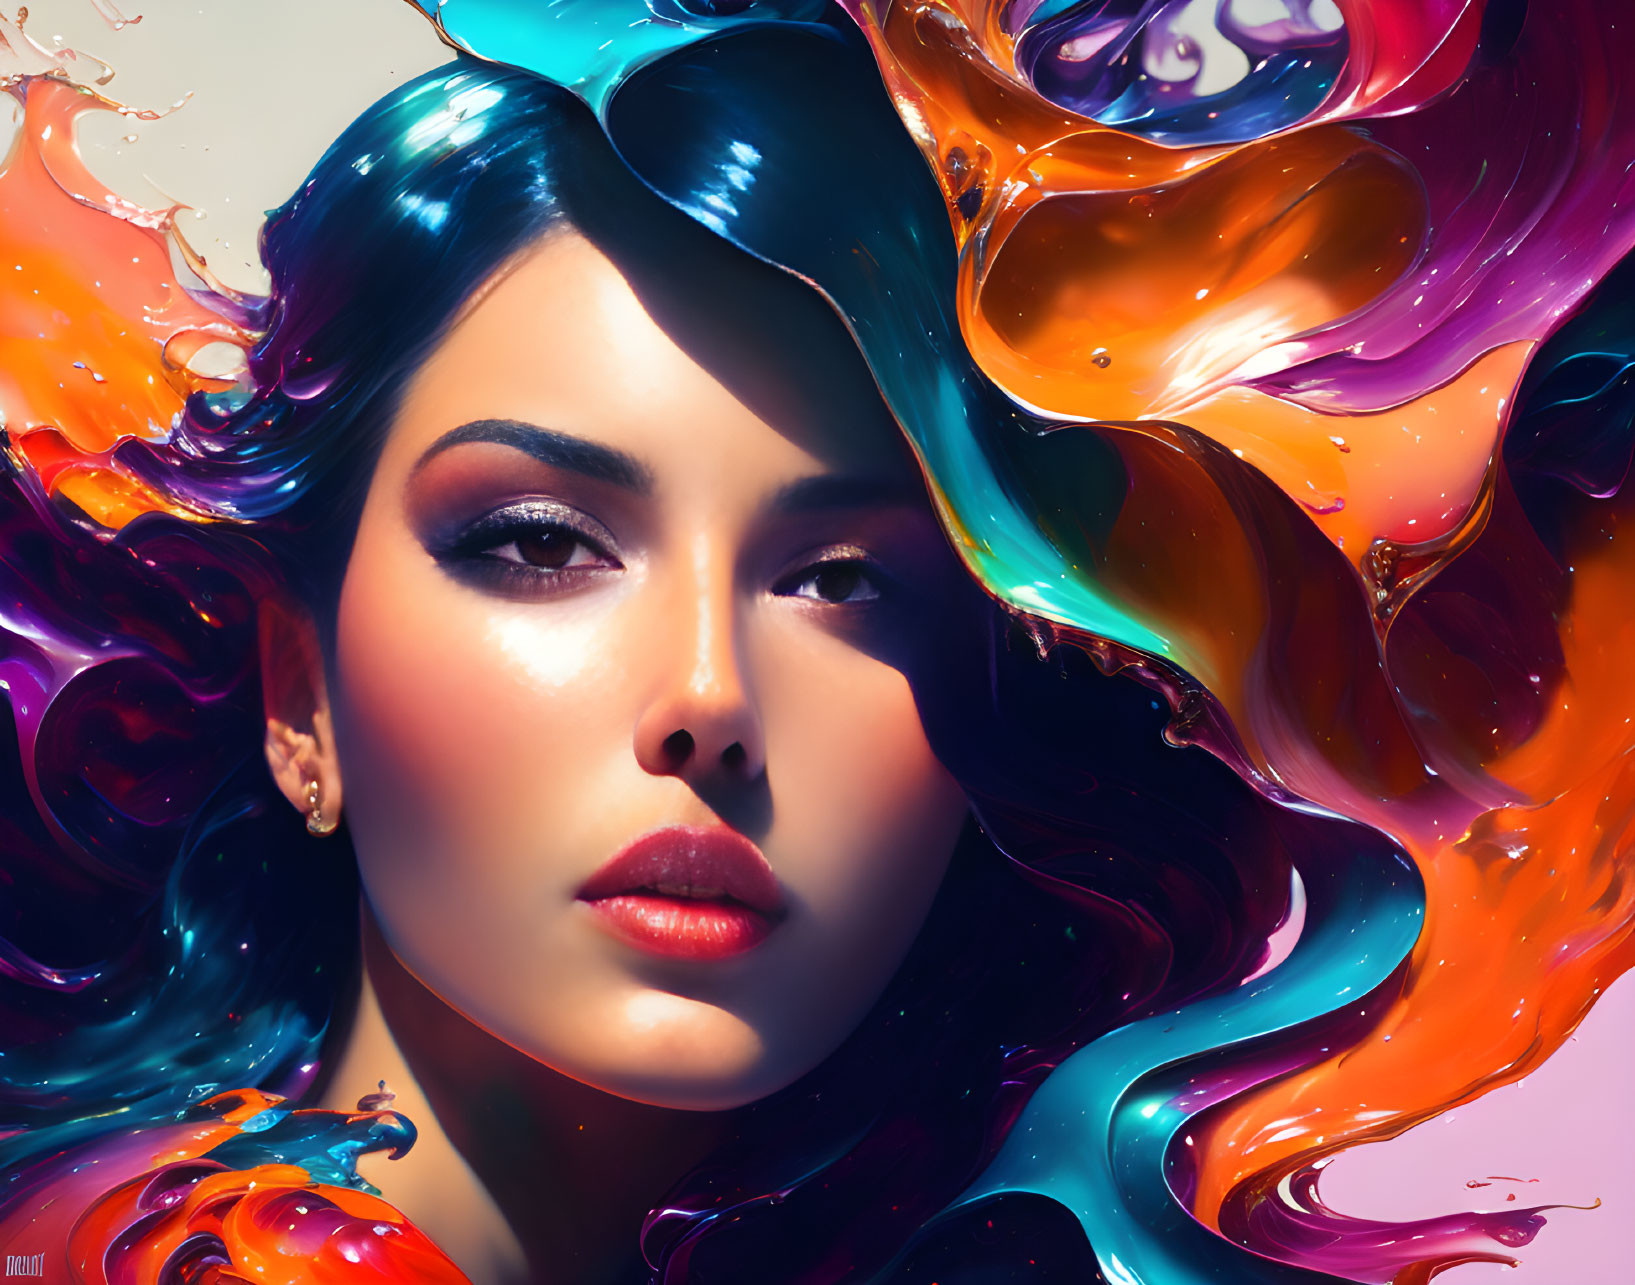 Colorful digital artwork: Woman with flowing hair merging into swirling paint patterns